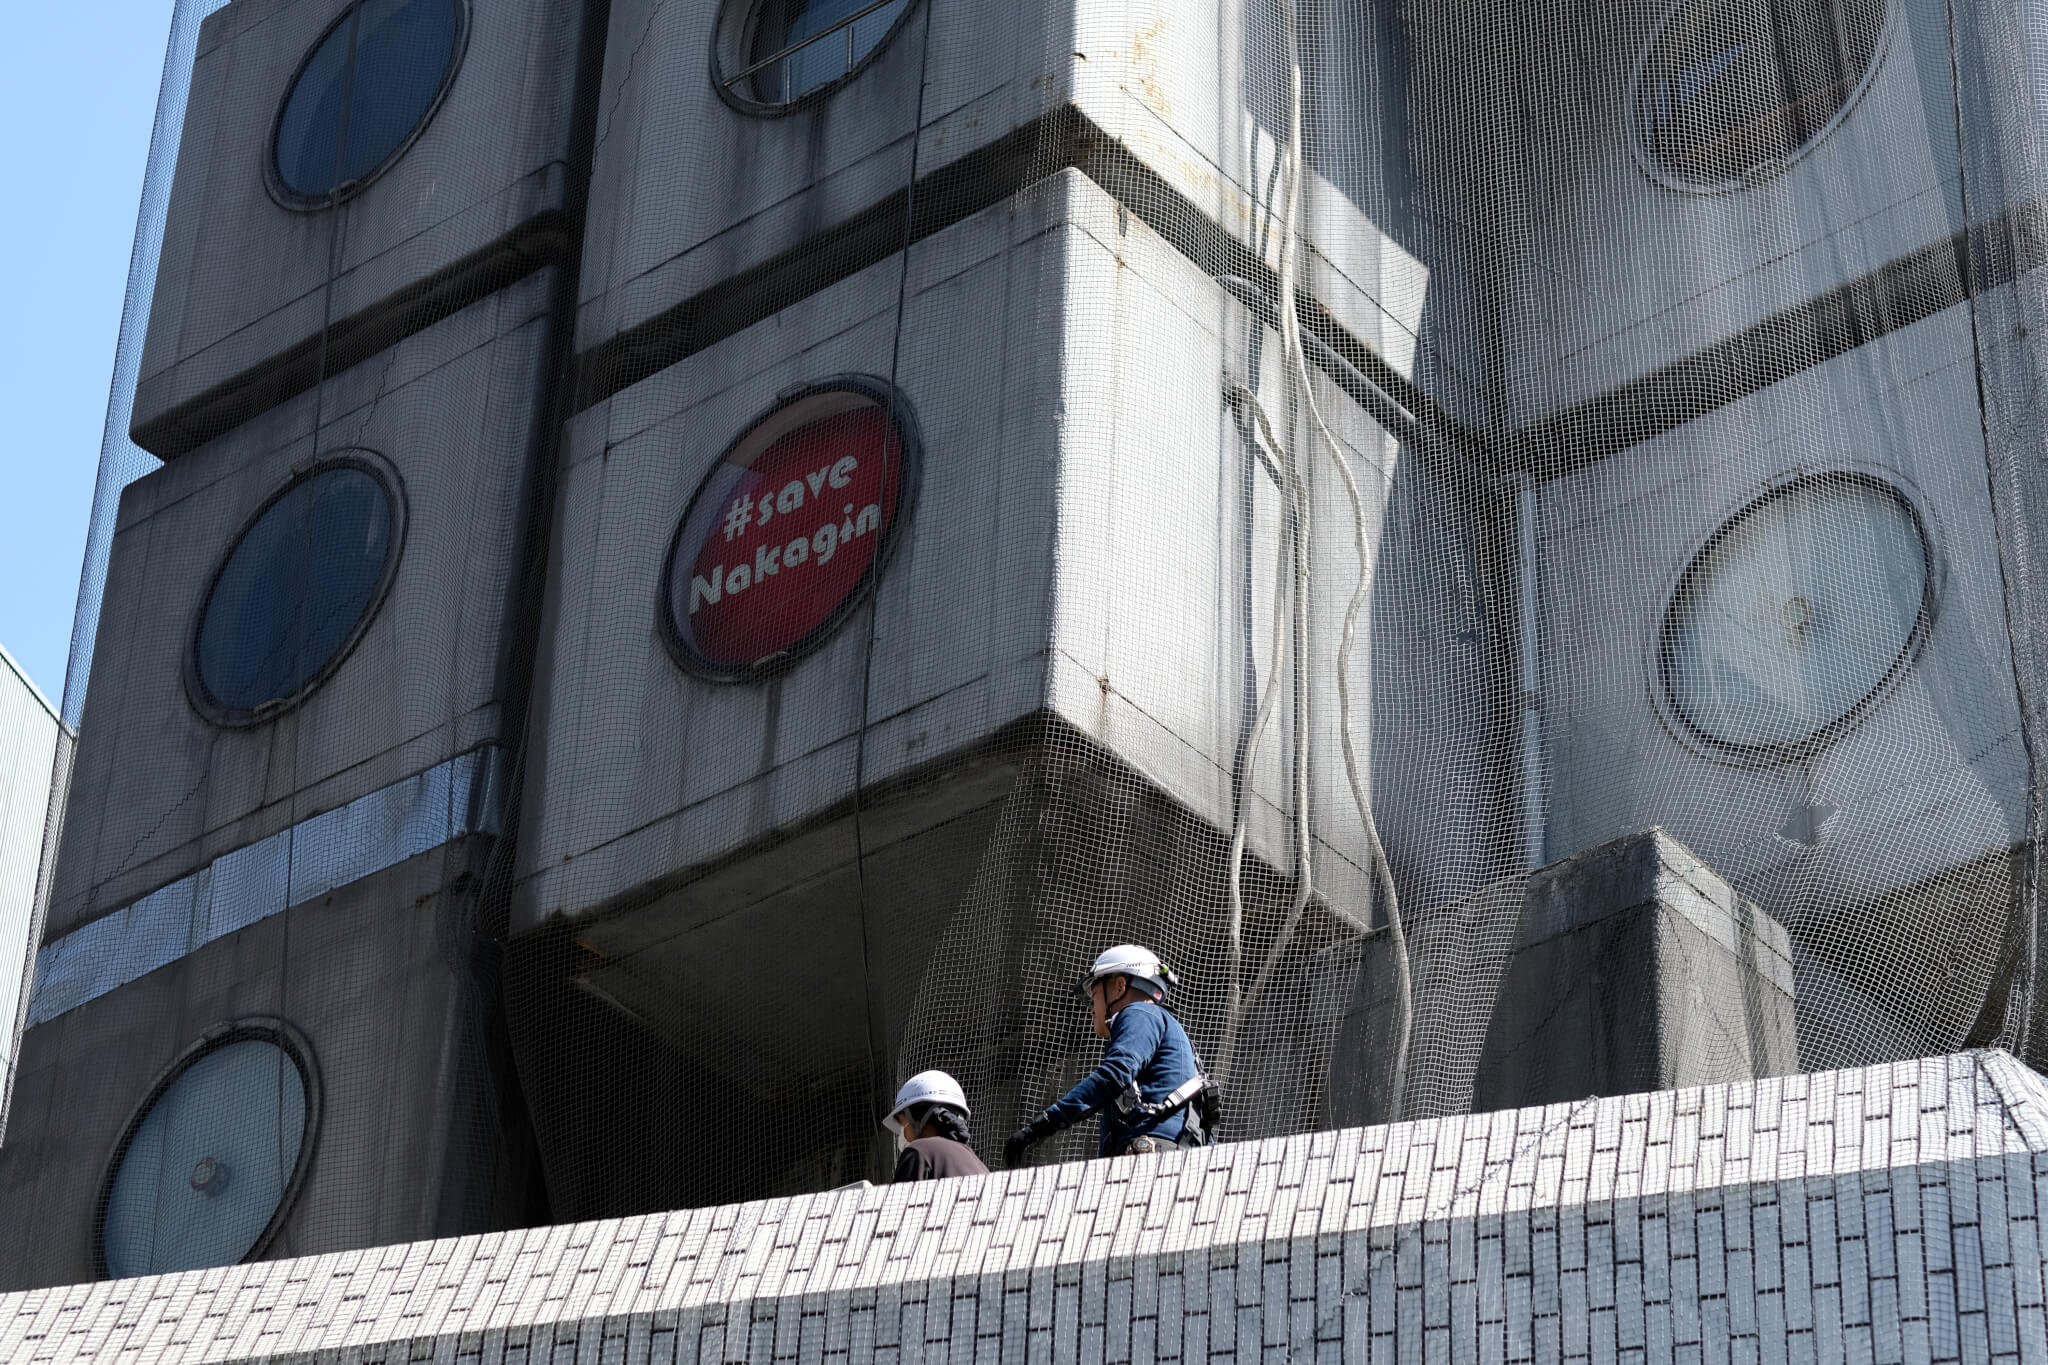 construction workers on tower with save nakagin sign